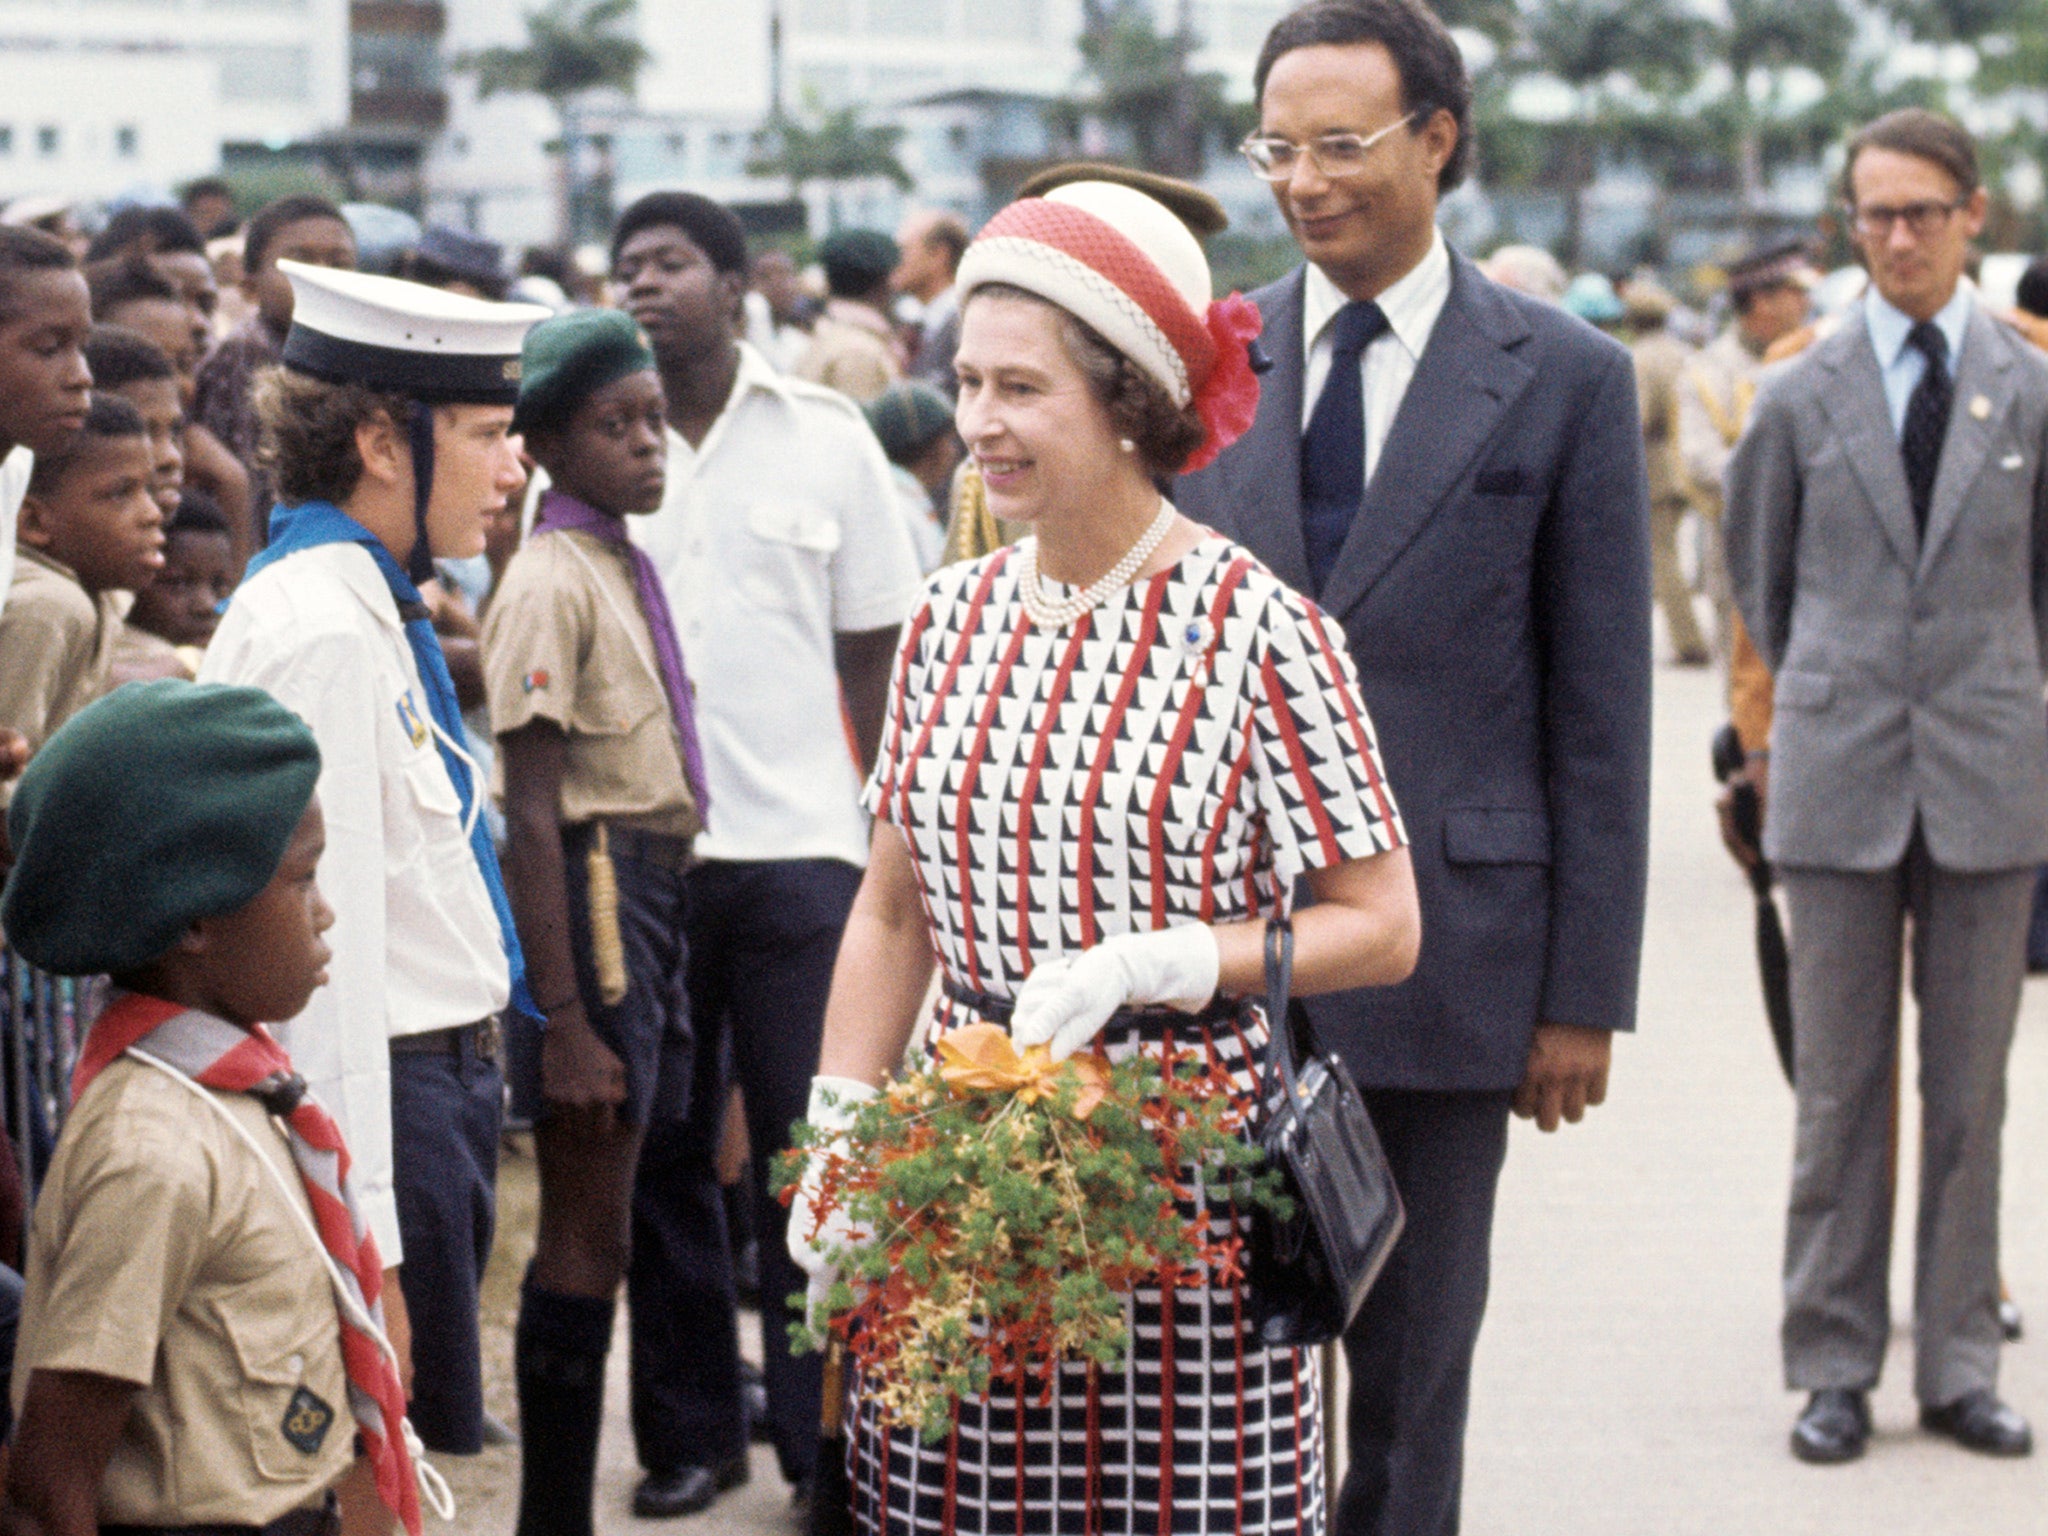 The Queen visits Bridgetown during her silver jubilee tour in 1977